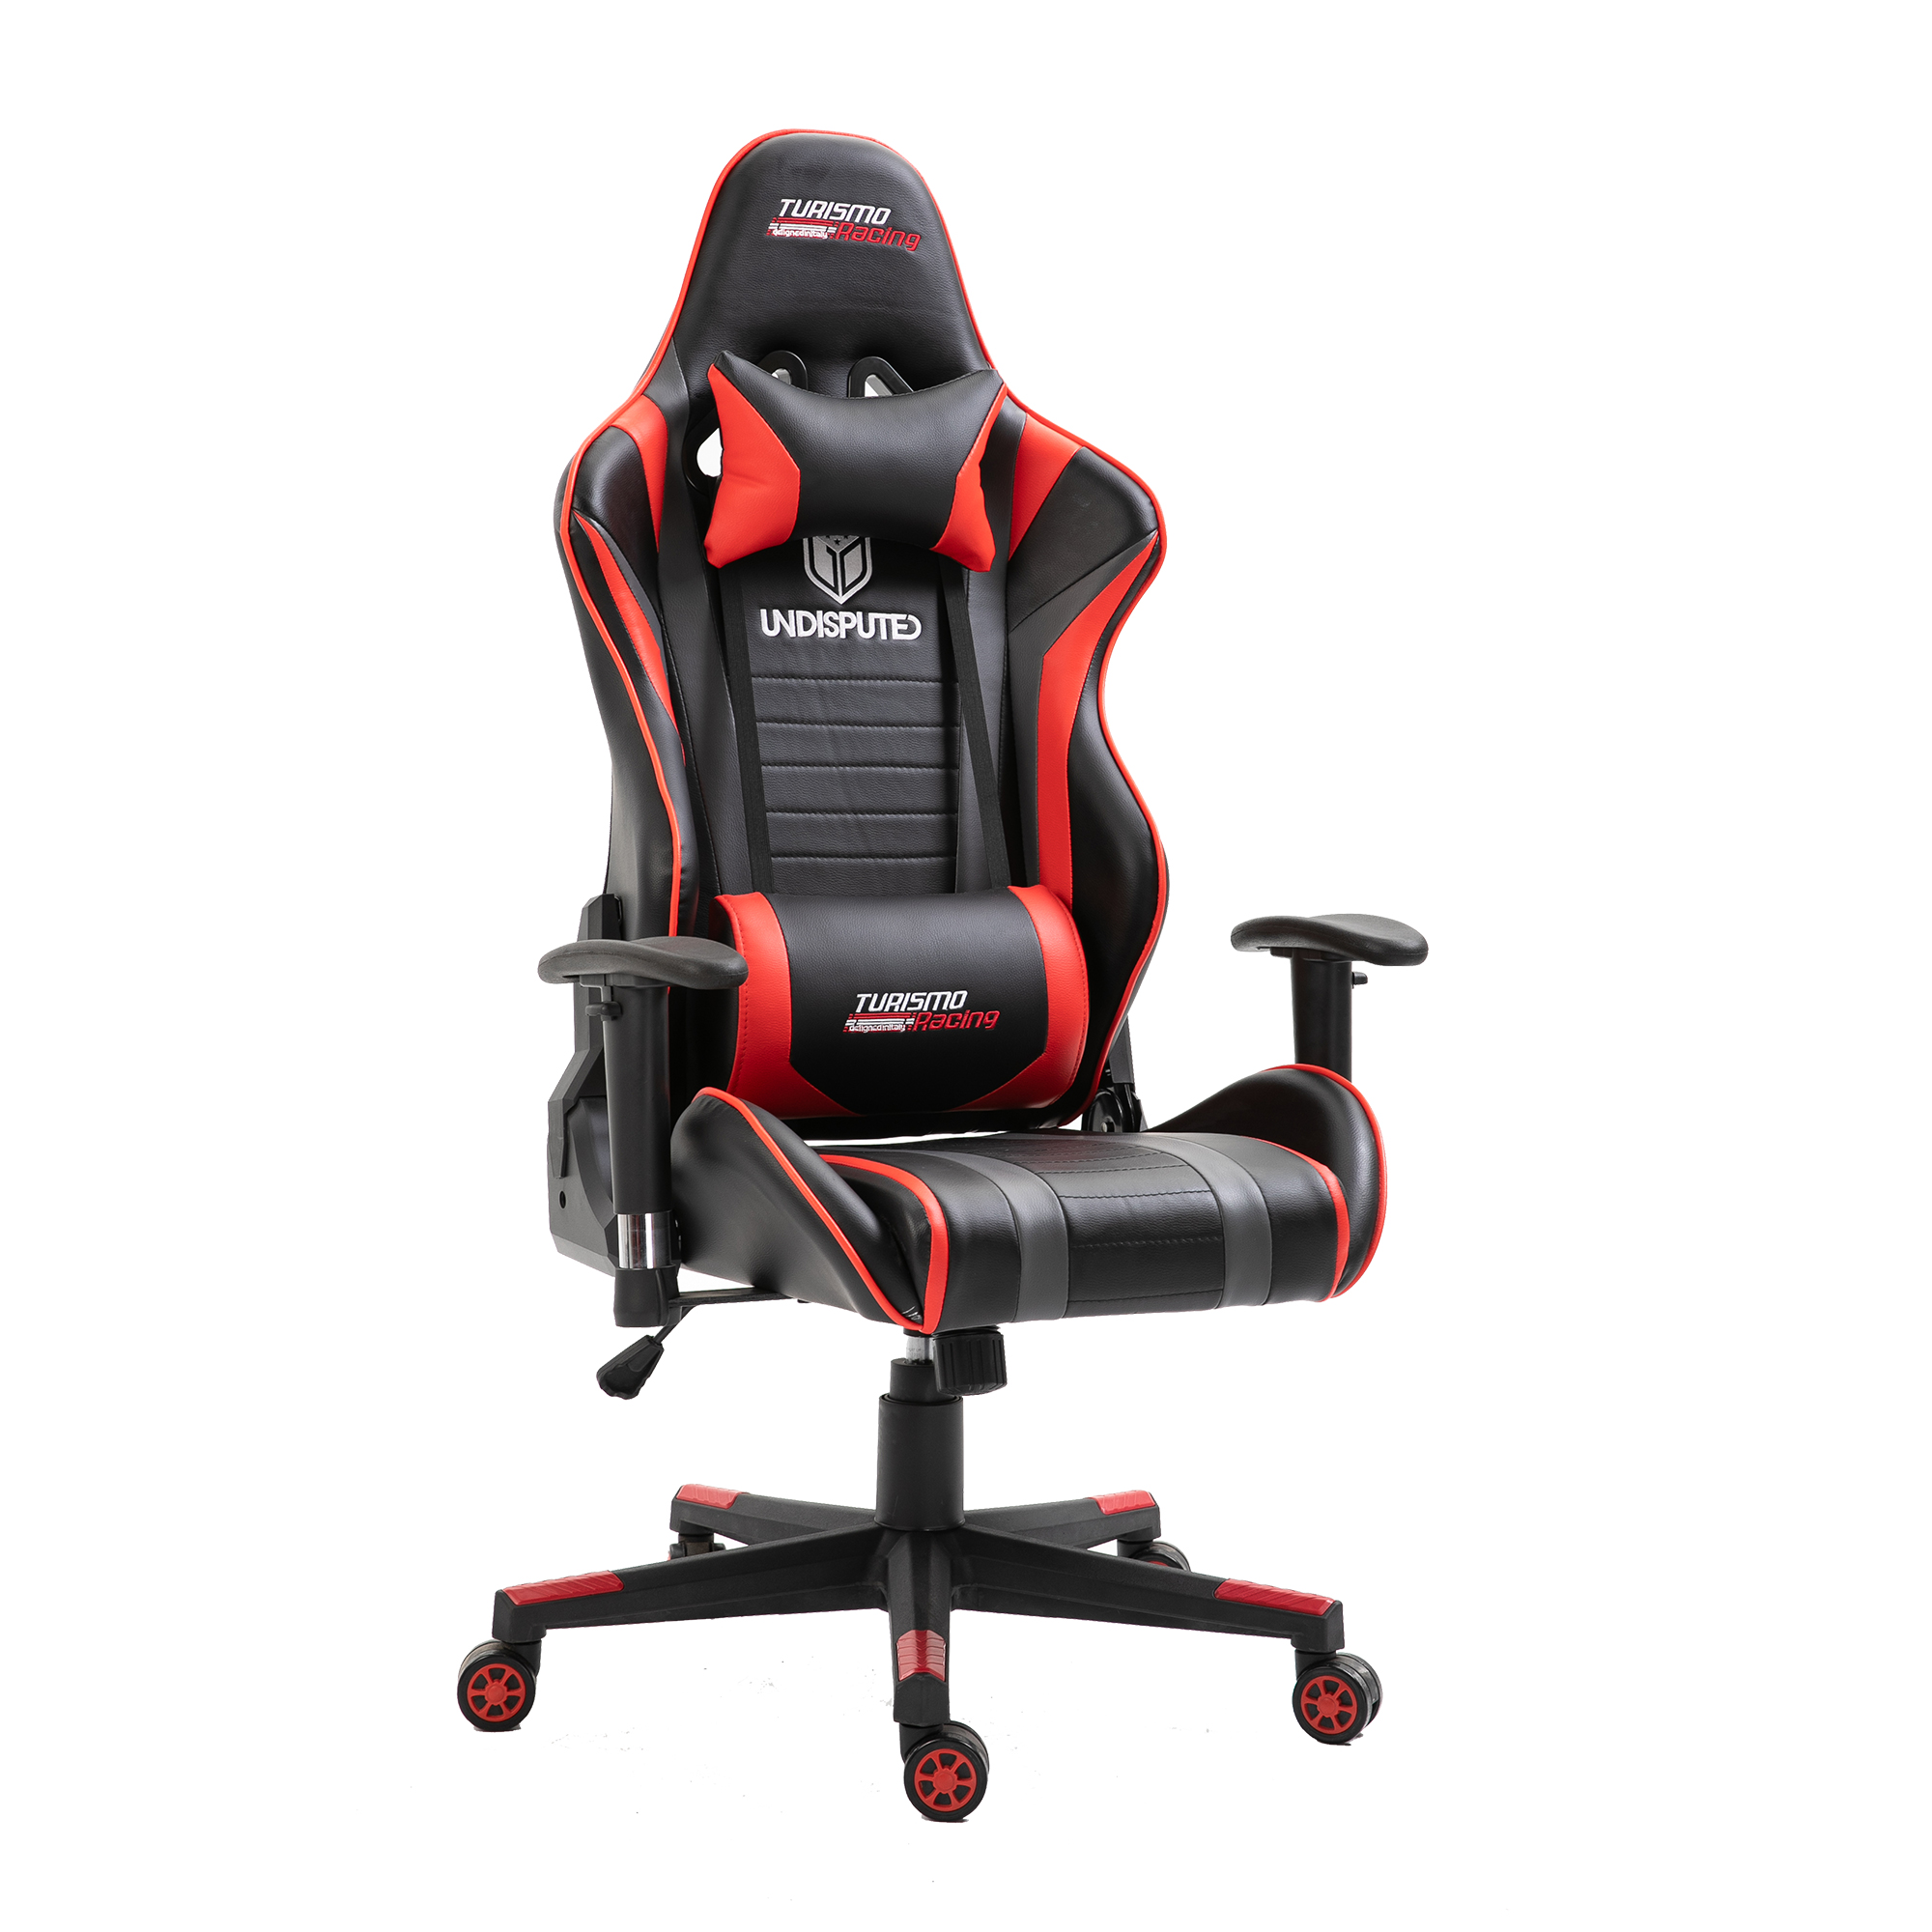 China wholesale Sofas For Small Living Rooms Suppliers –  High quality Ergonomic Silla Gamer luxury swivel cheap pu leather racing home PC computer office chair gaming chair – ANJI JIFANG